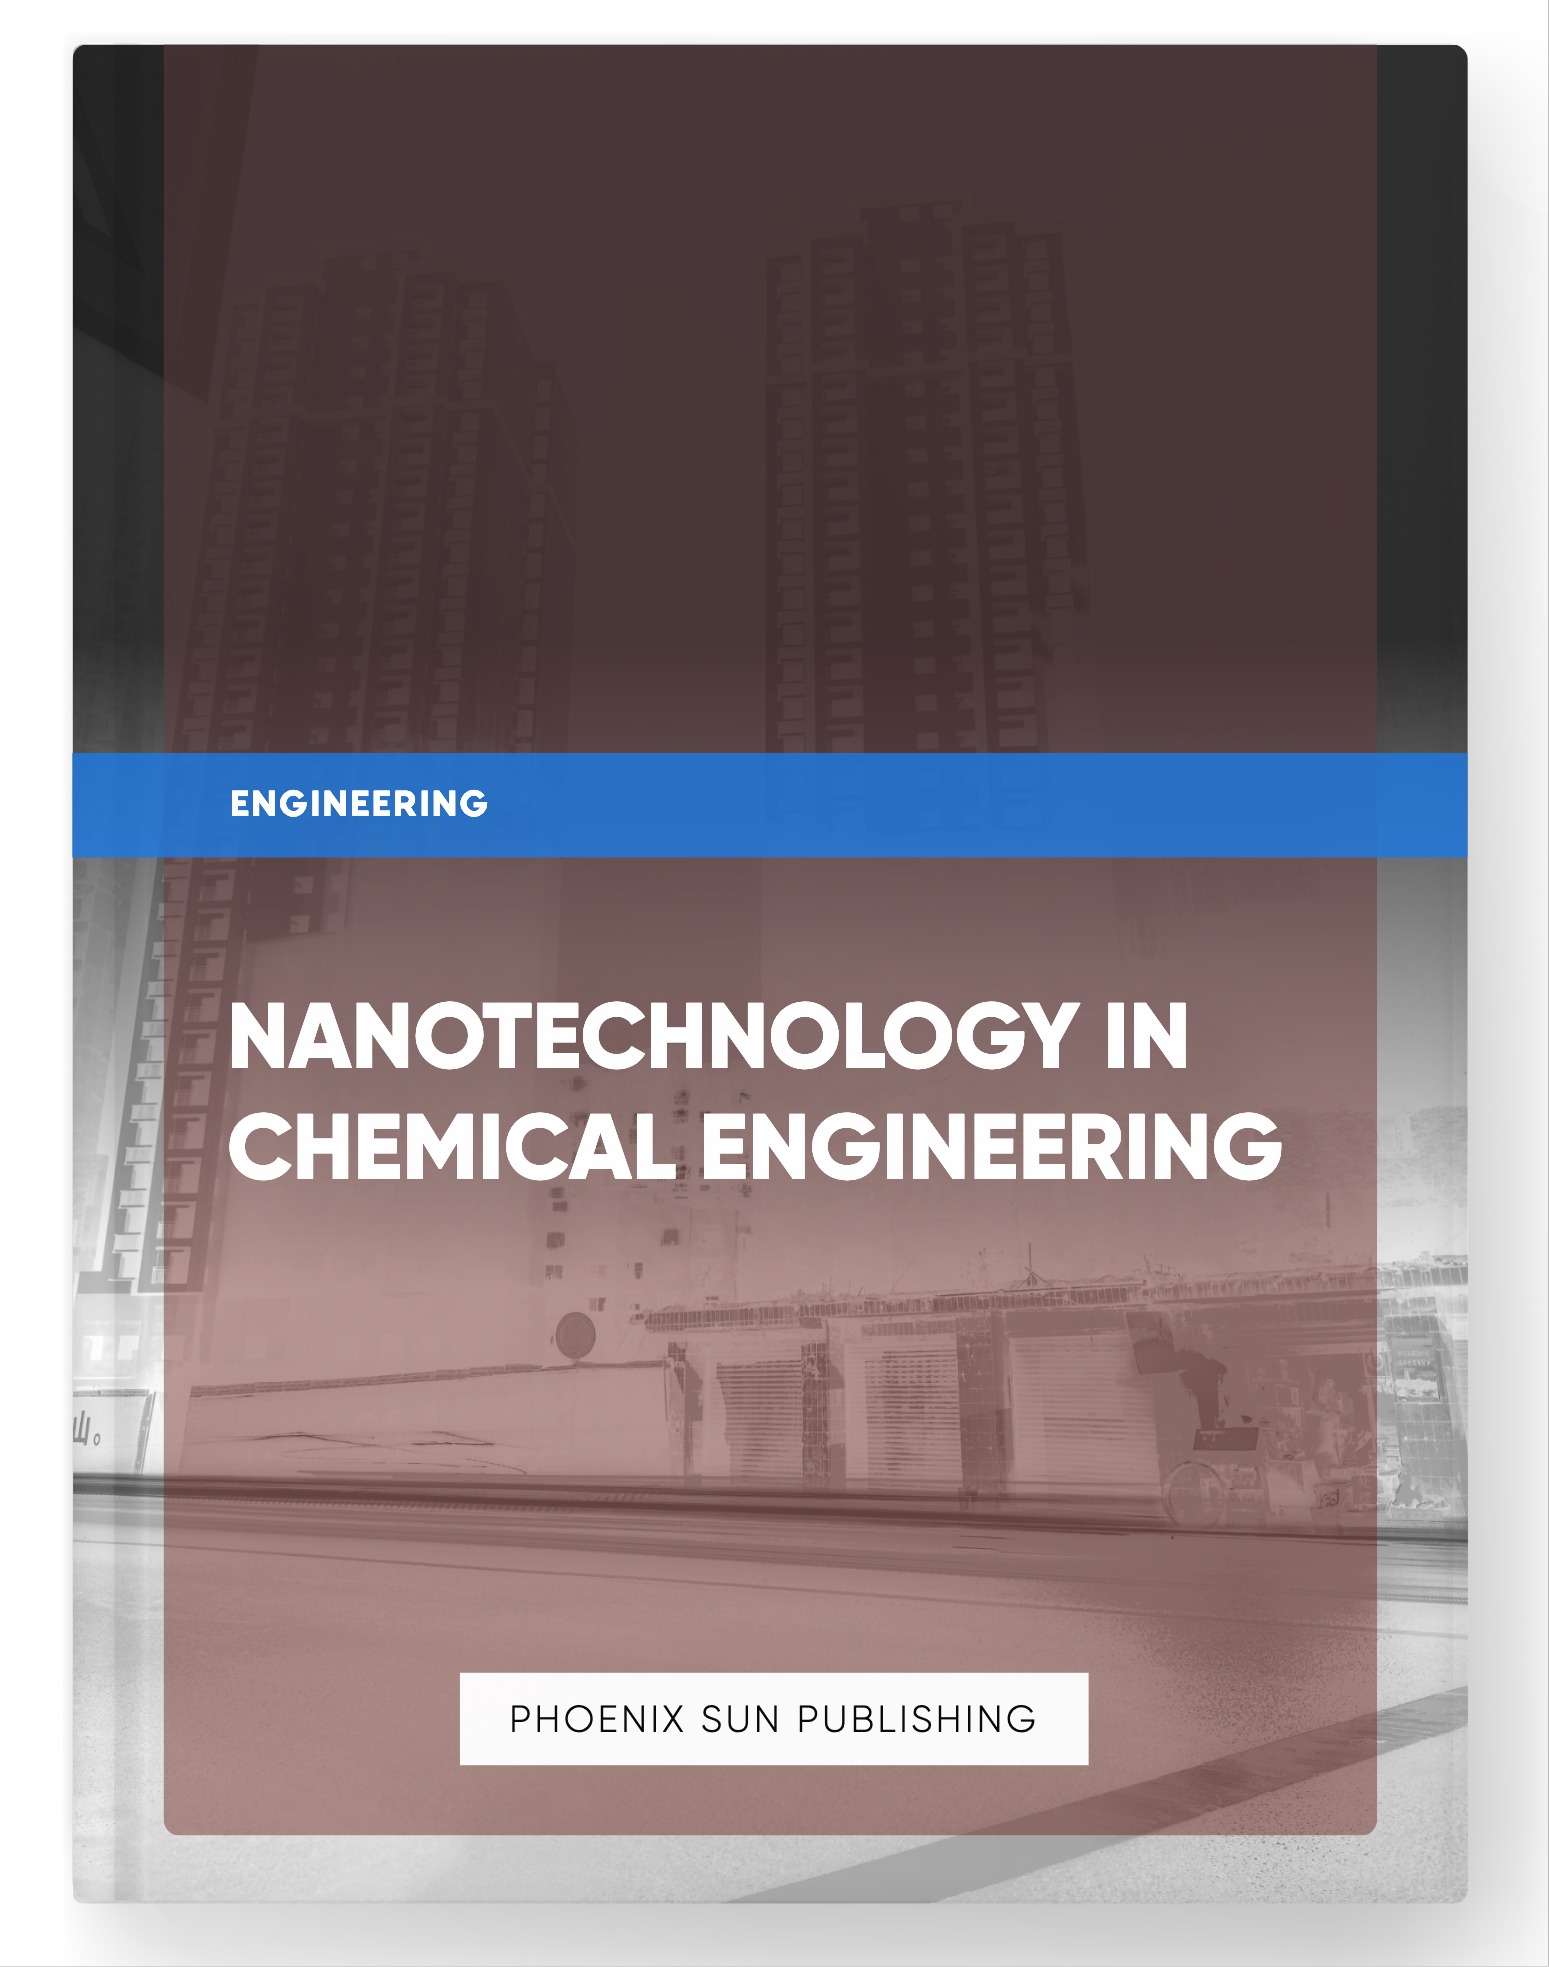 Nanotechnology in Chemical Engineering